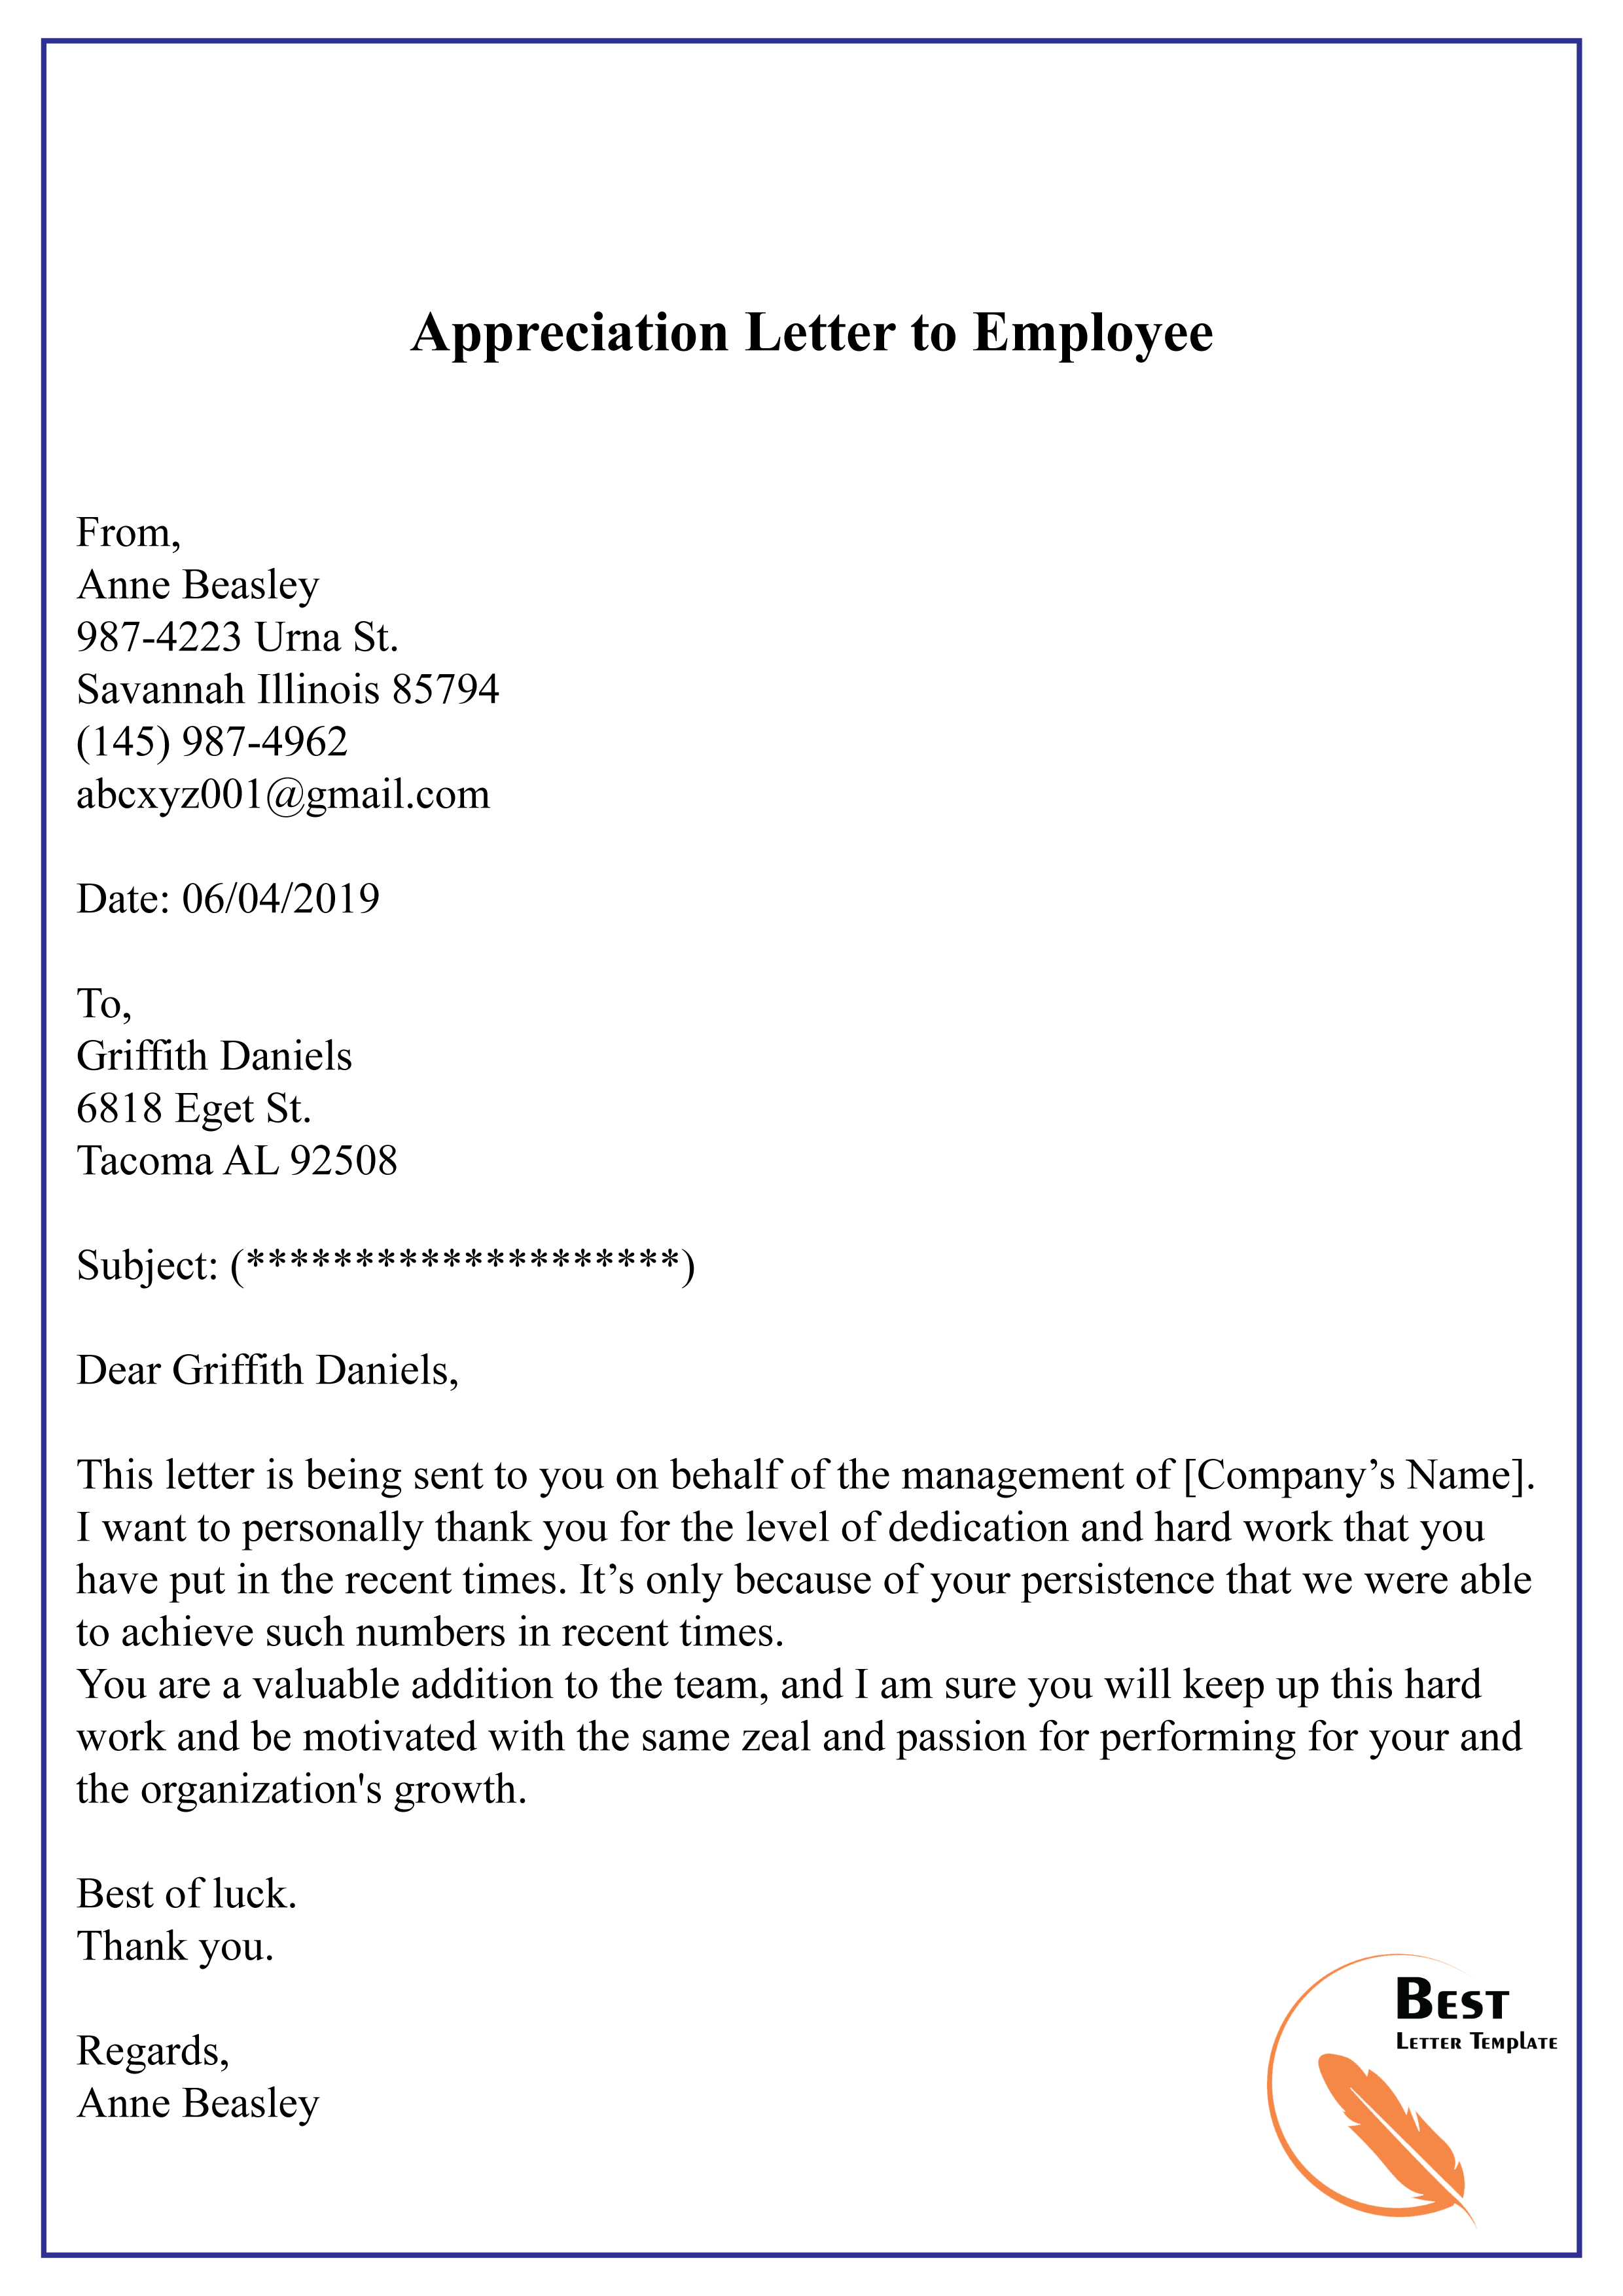 Appreciation Letter to Employee-01 - Best Letter Template